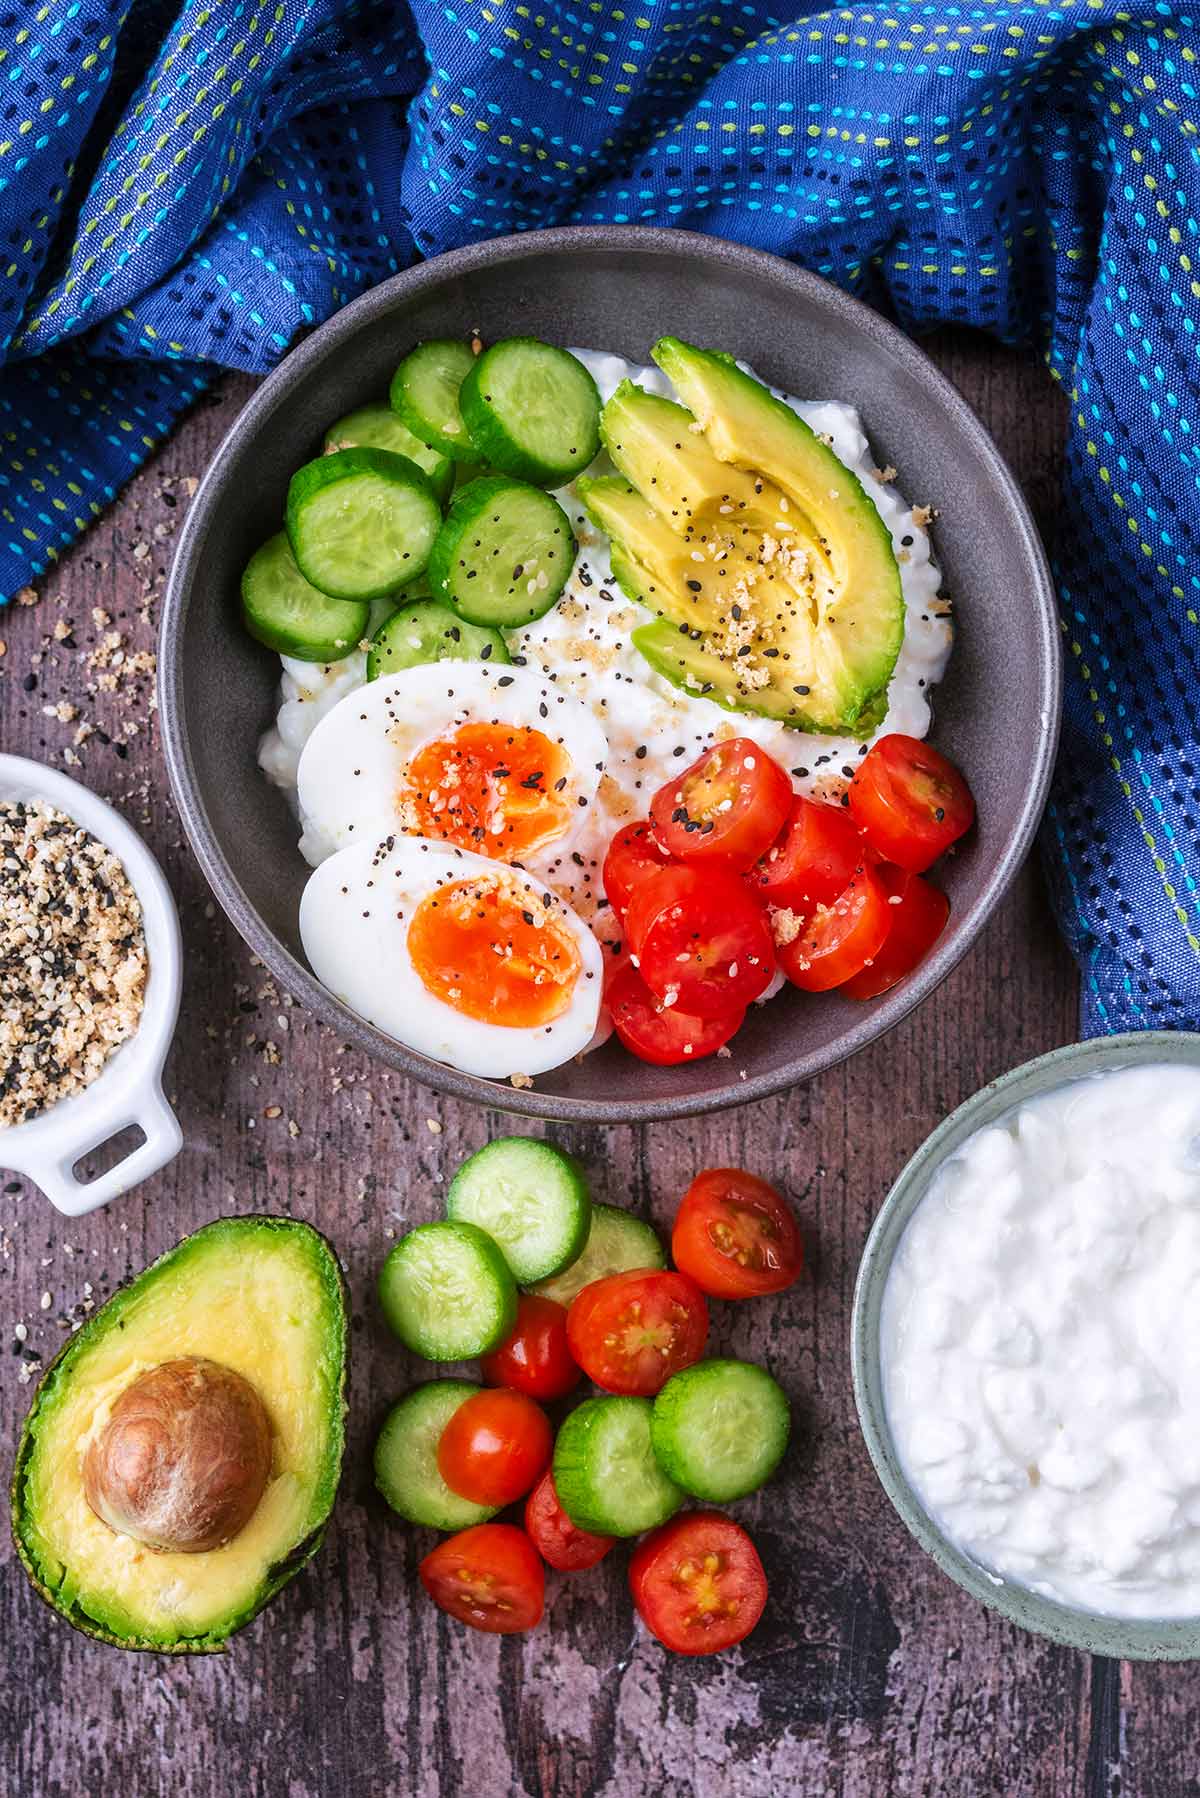 A bowl of cottage cheese , egg and salad next to more cottage cheese, cucumber and tomato slices.